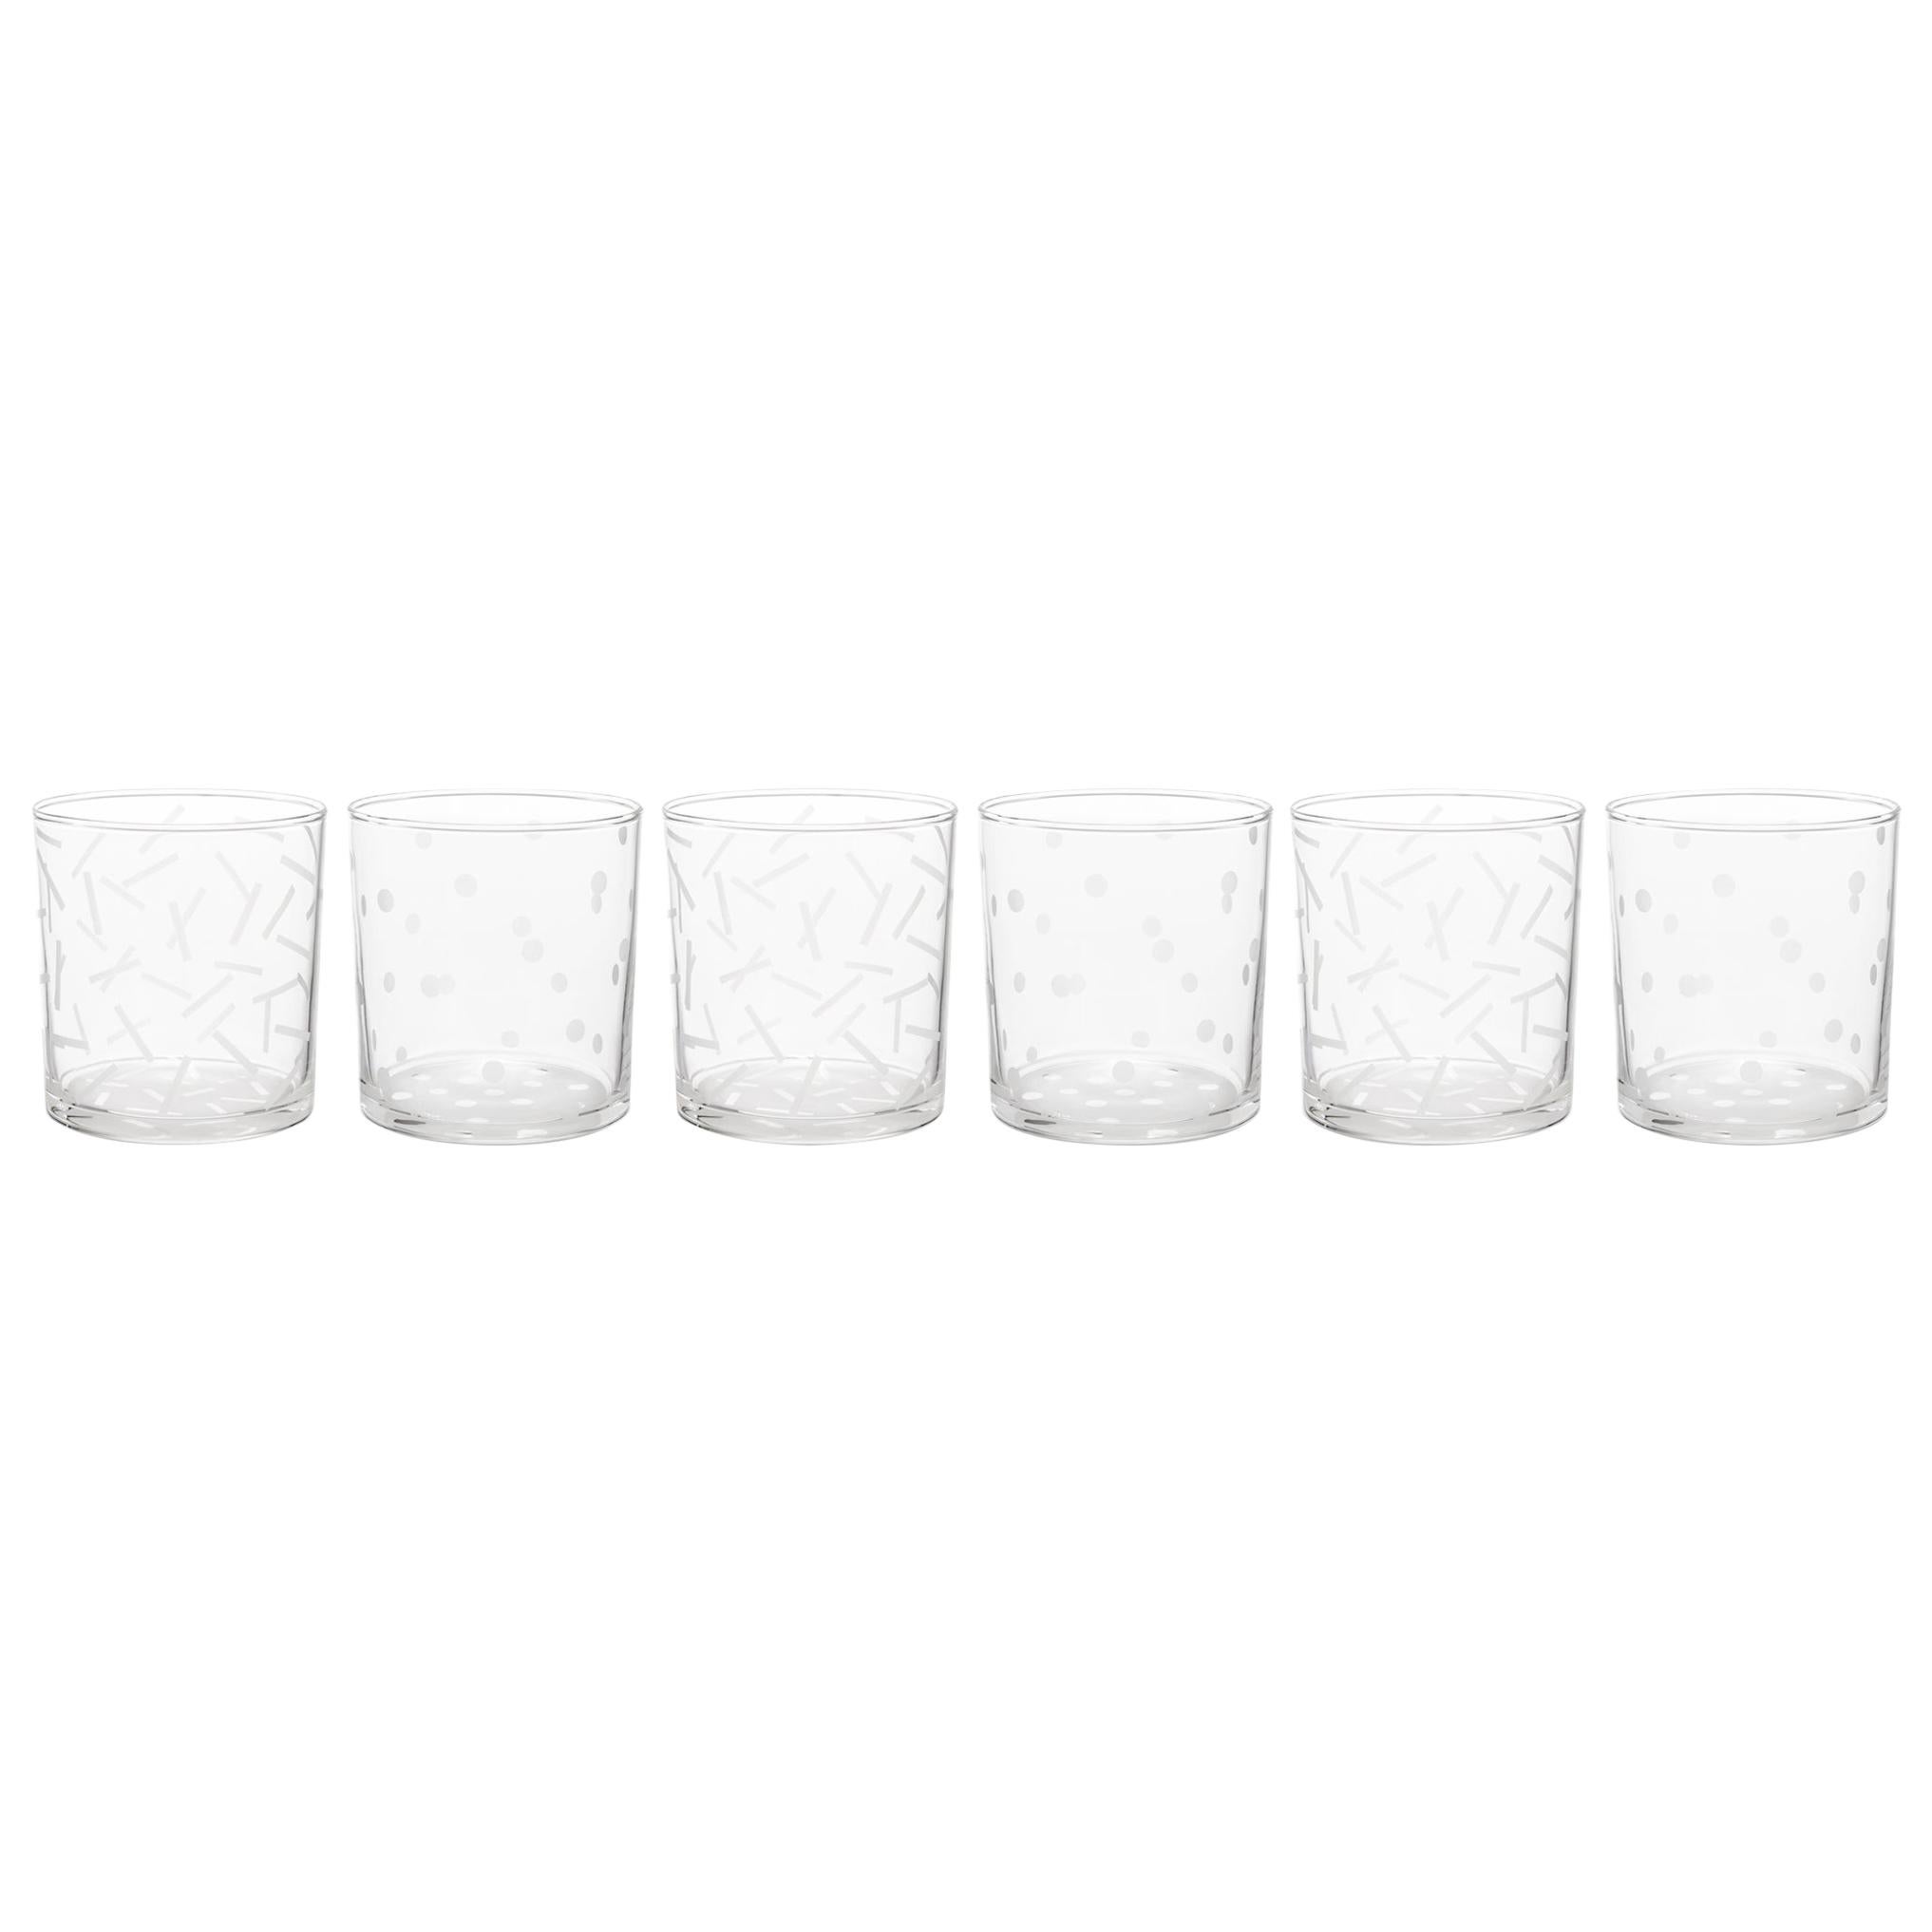 Dots and Dashes Glasses Set of 6 by Judy Smilow For Sale